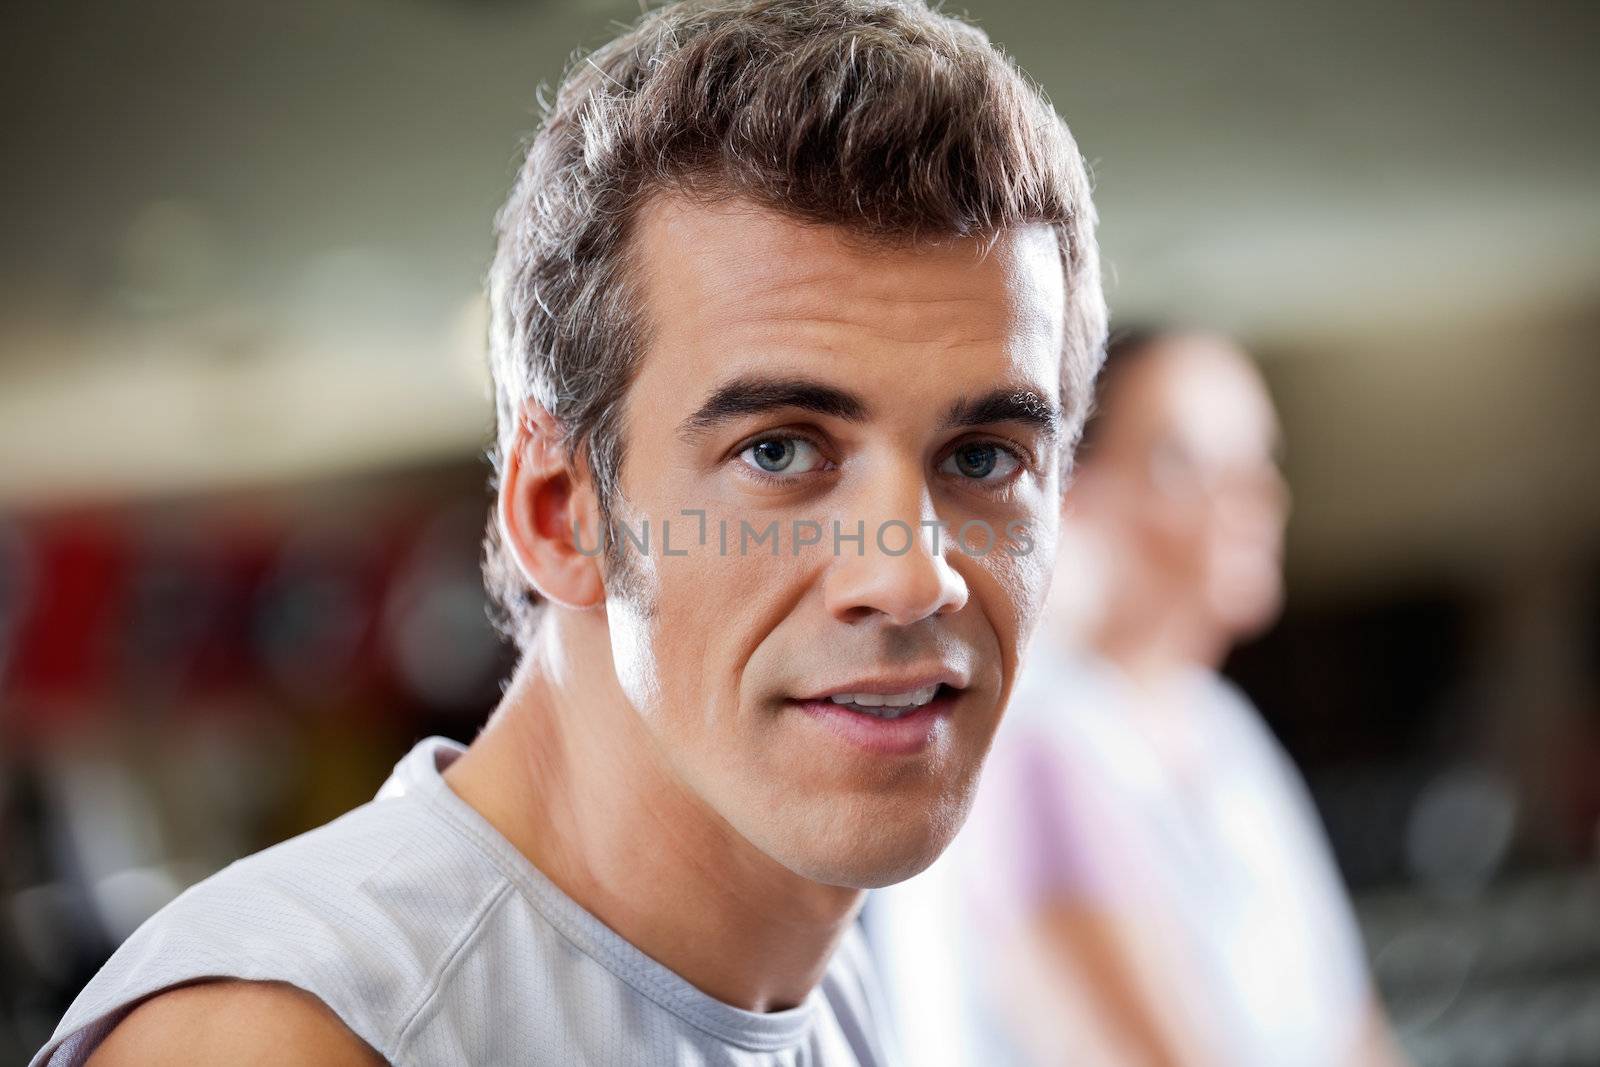 Close-up portrait of young man in health club with woman in the background